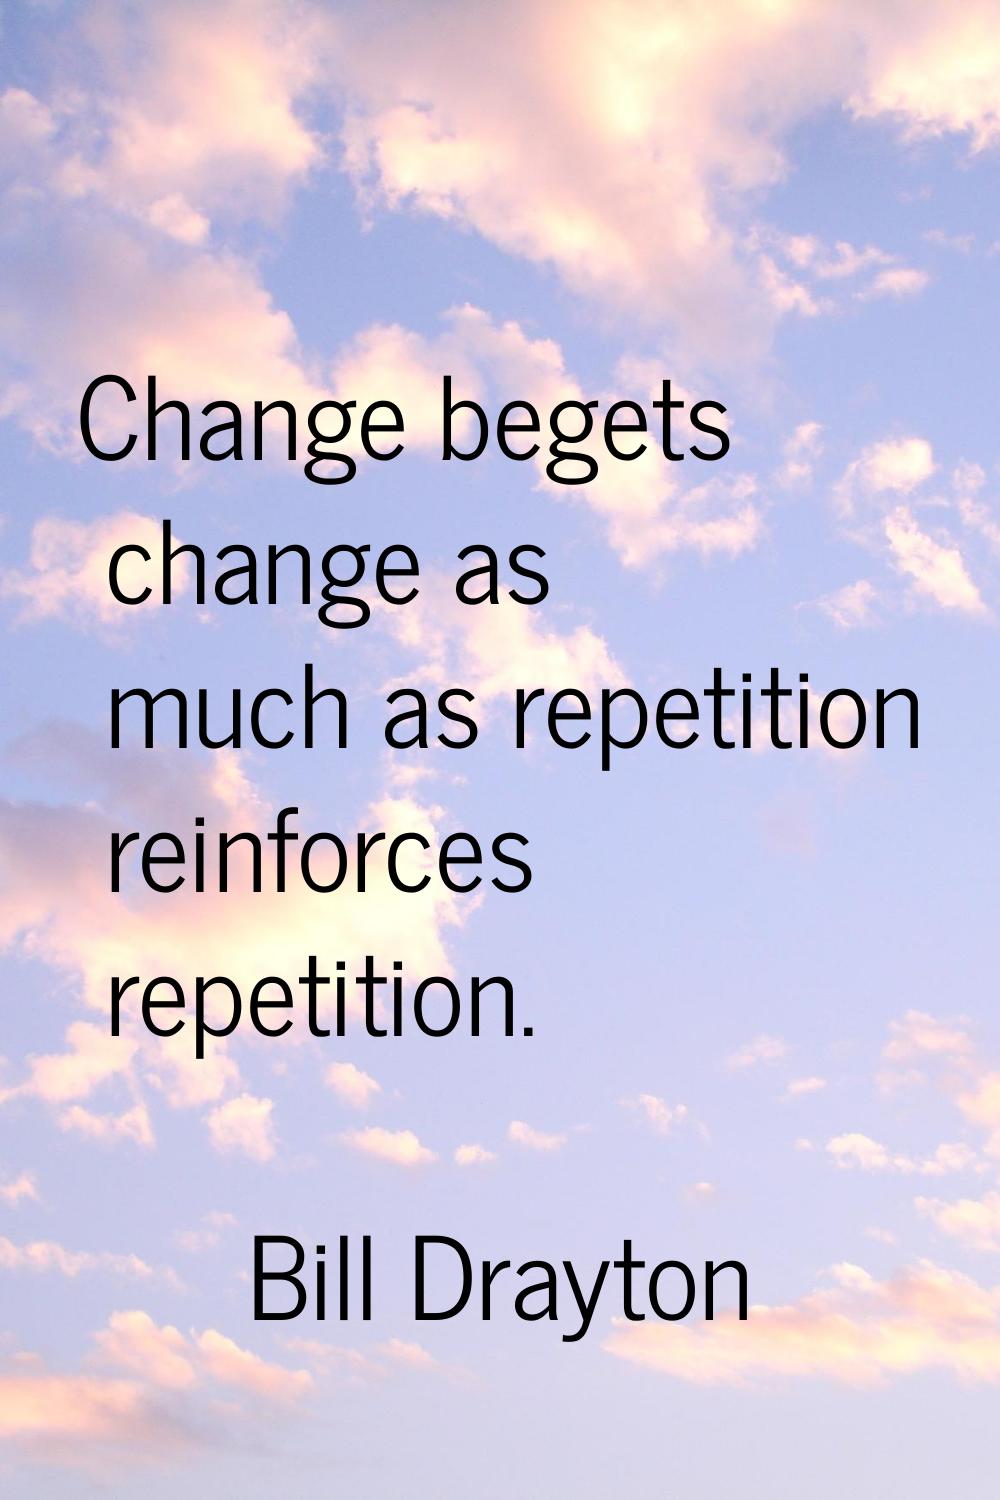 Change begets change as much as repetition reinforces repetition.